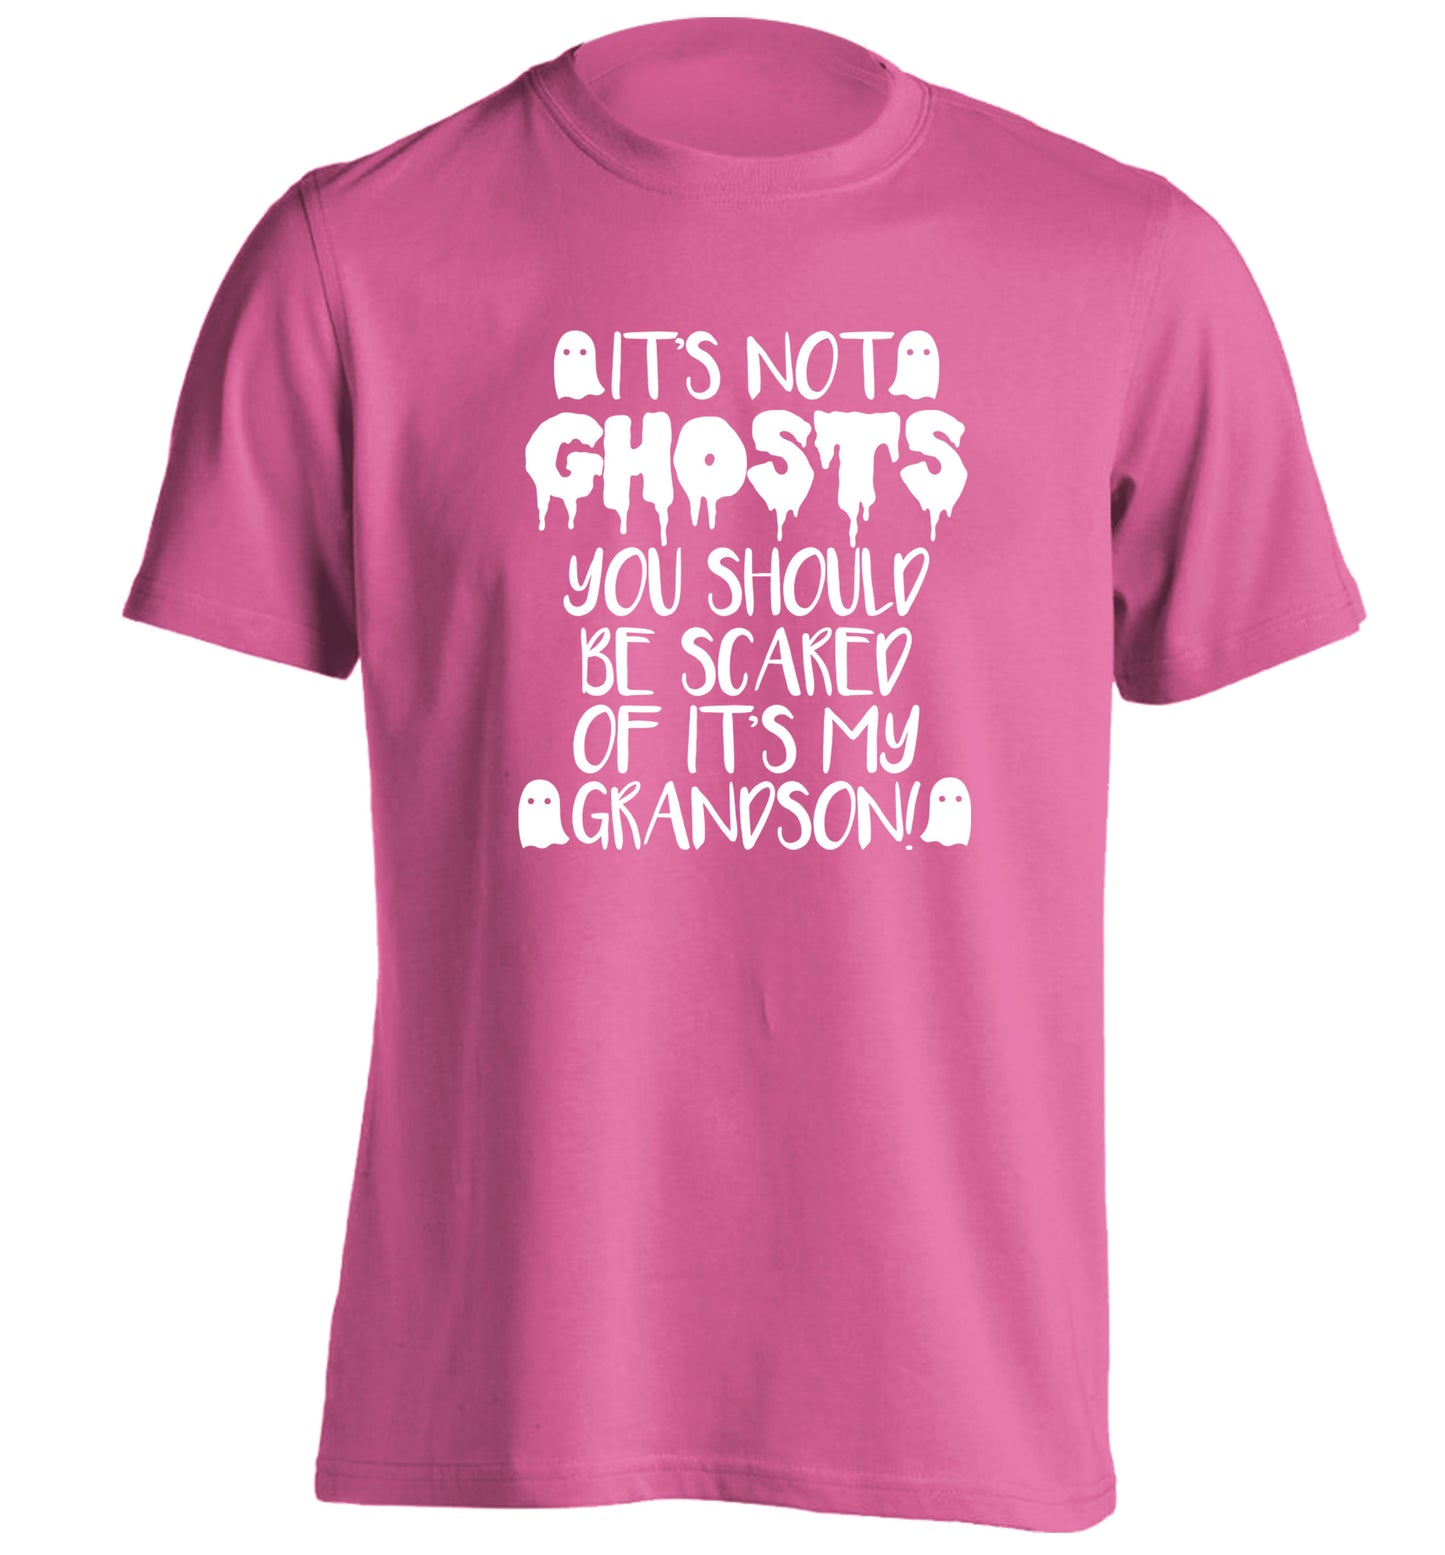 It's not ghosts you should be scared of it's my grandson! adults unisex pink Tshirt 2XL